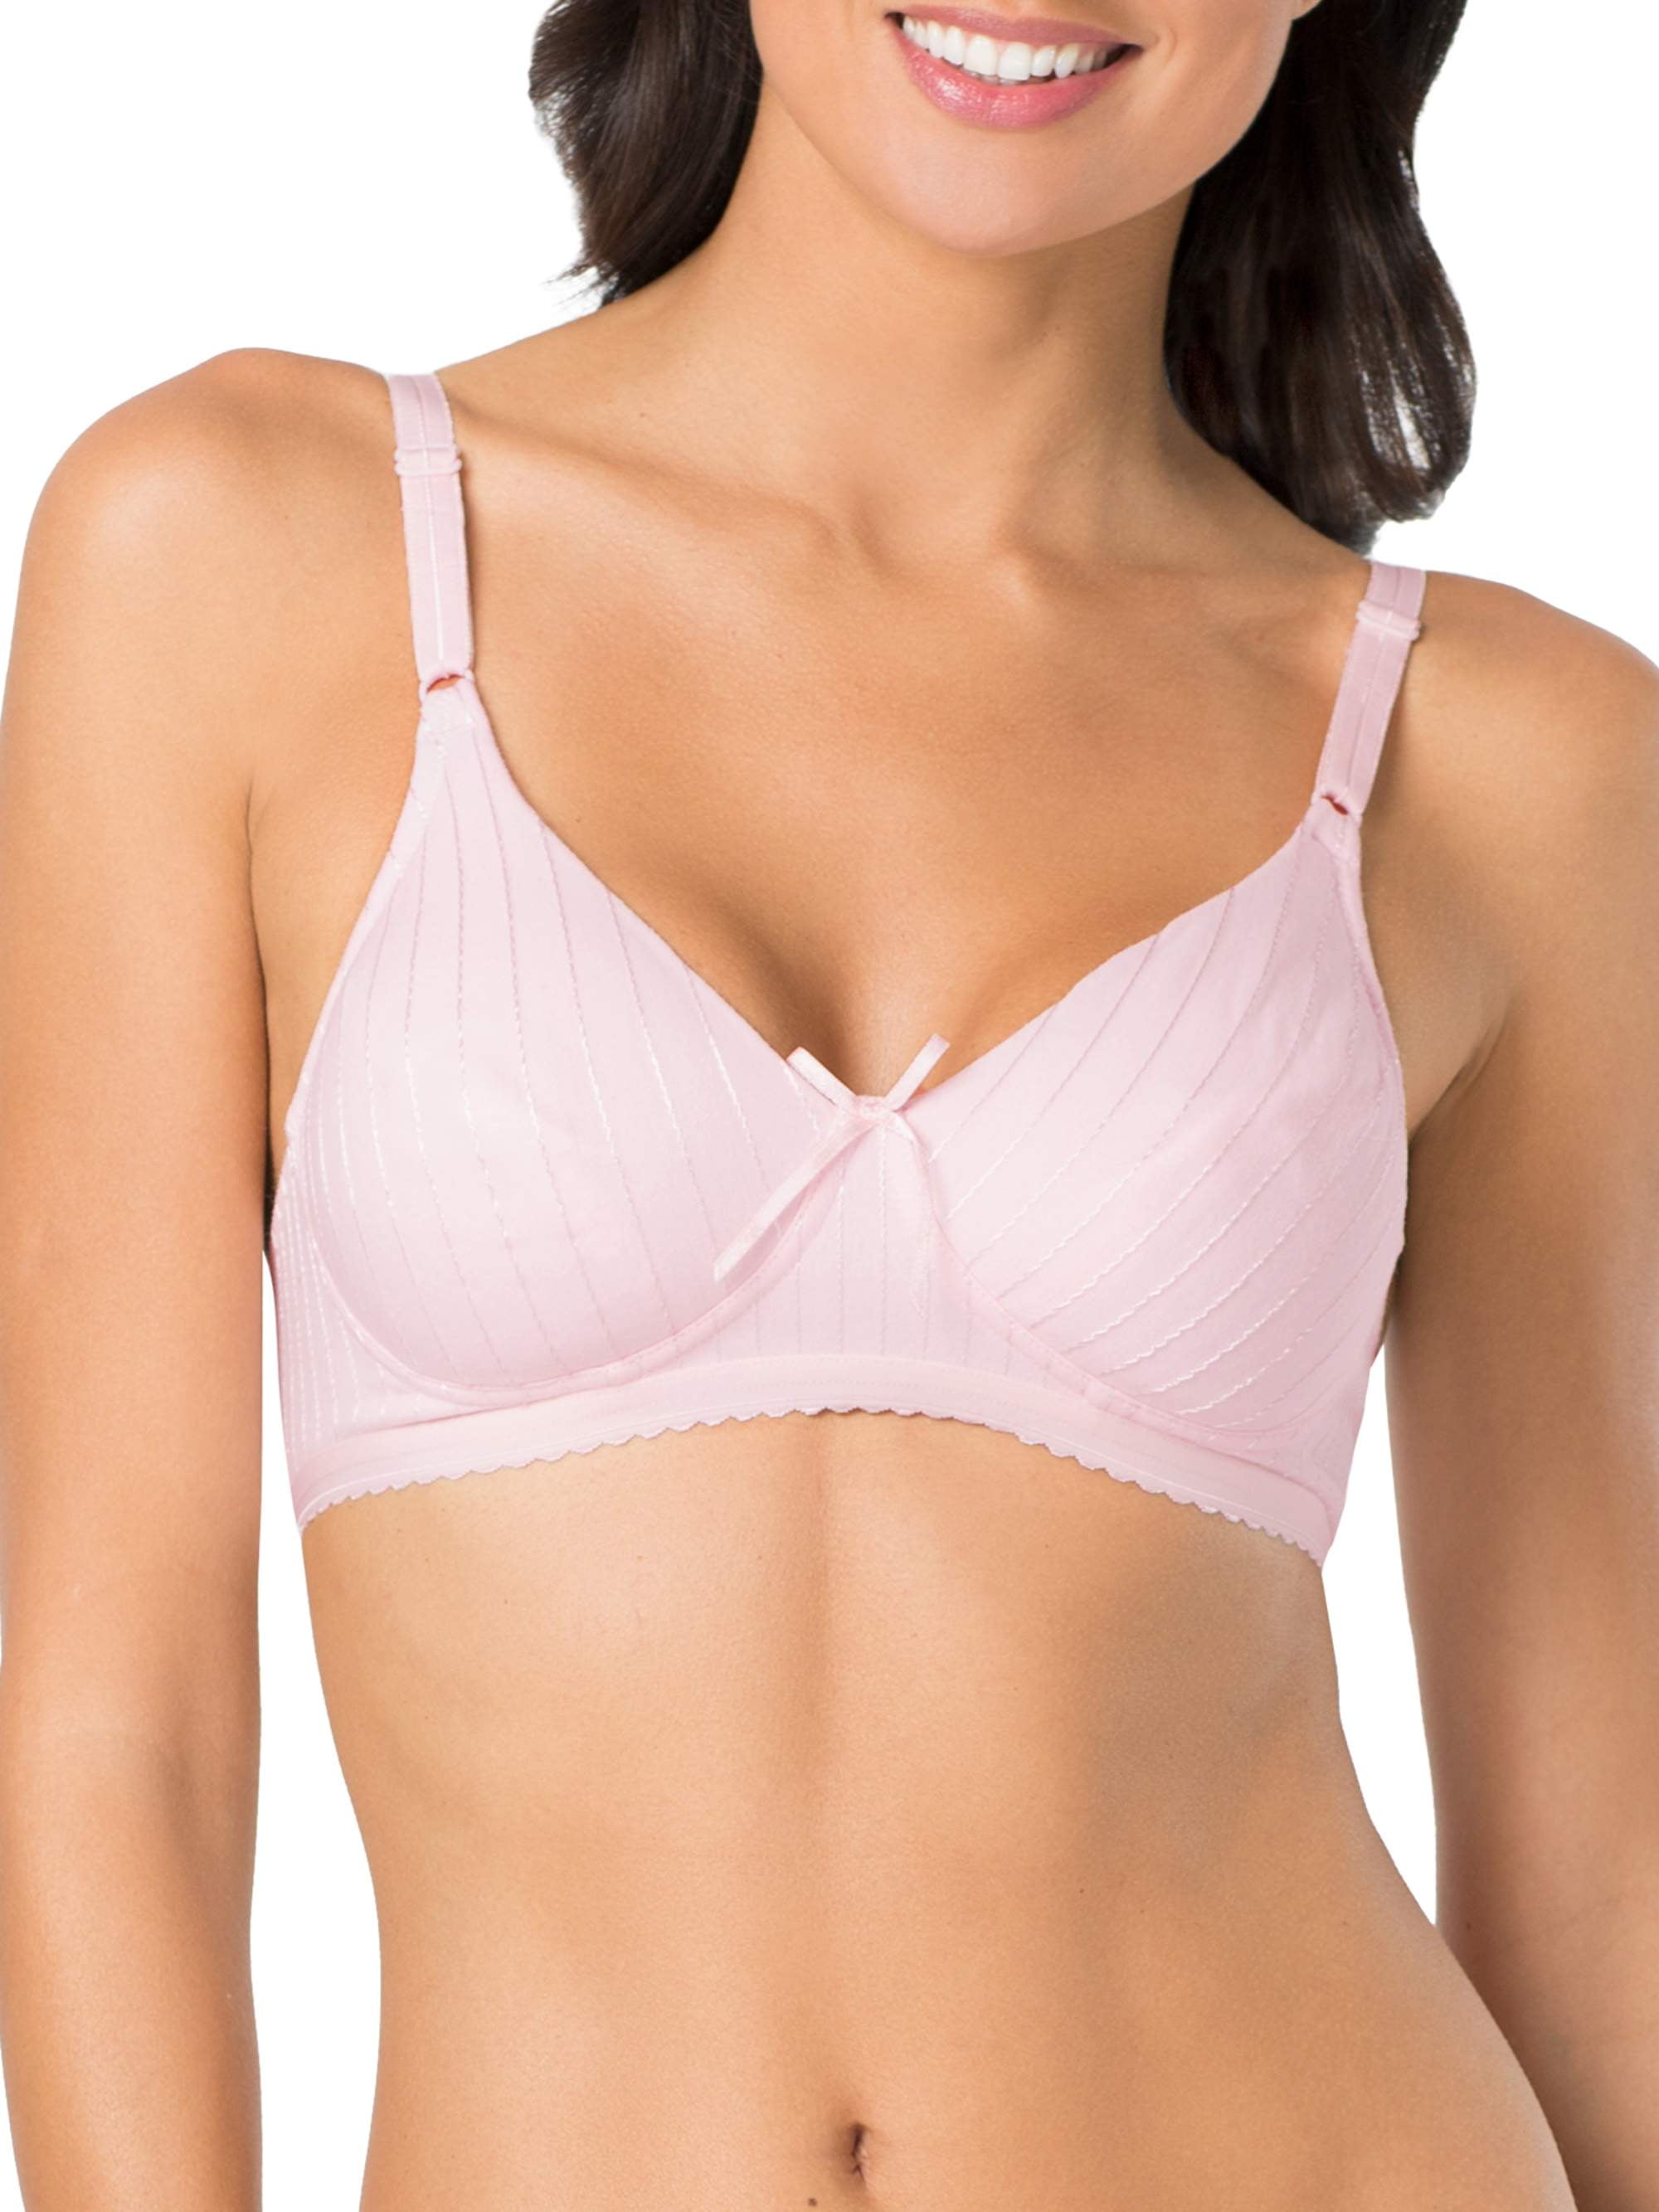 Fruit of the Loom Womens Seamed Soft Cup Wirefree Cotton Bra (2